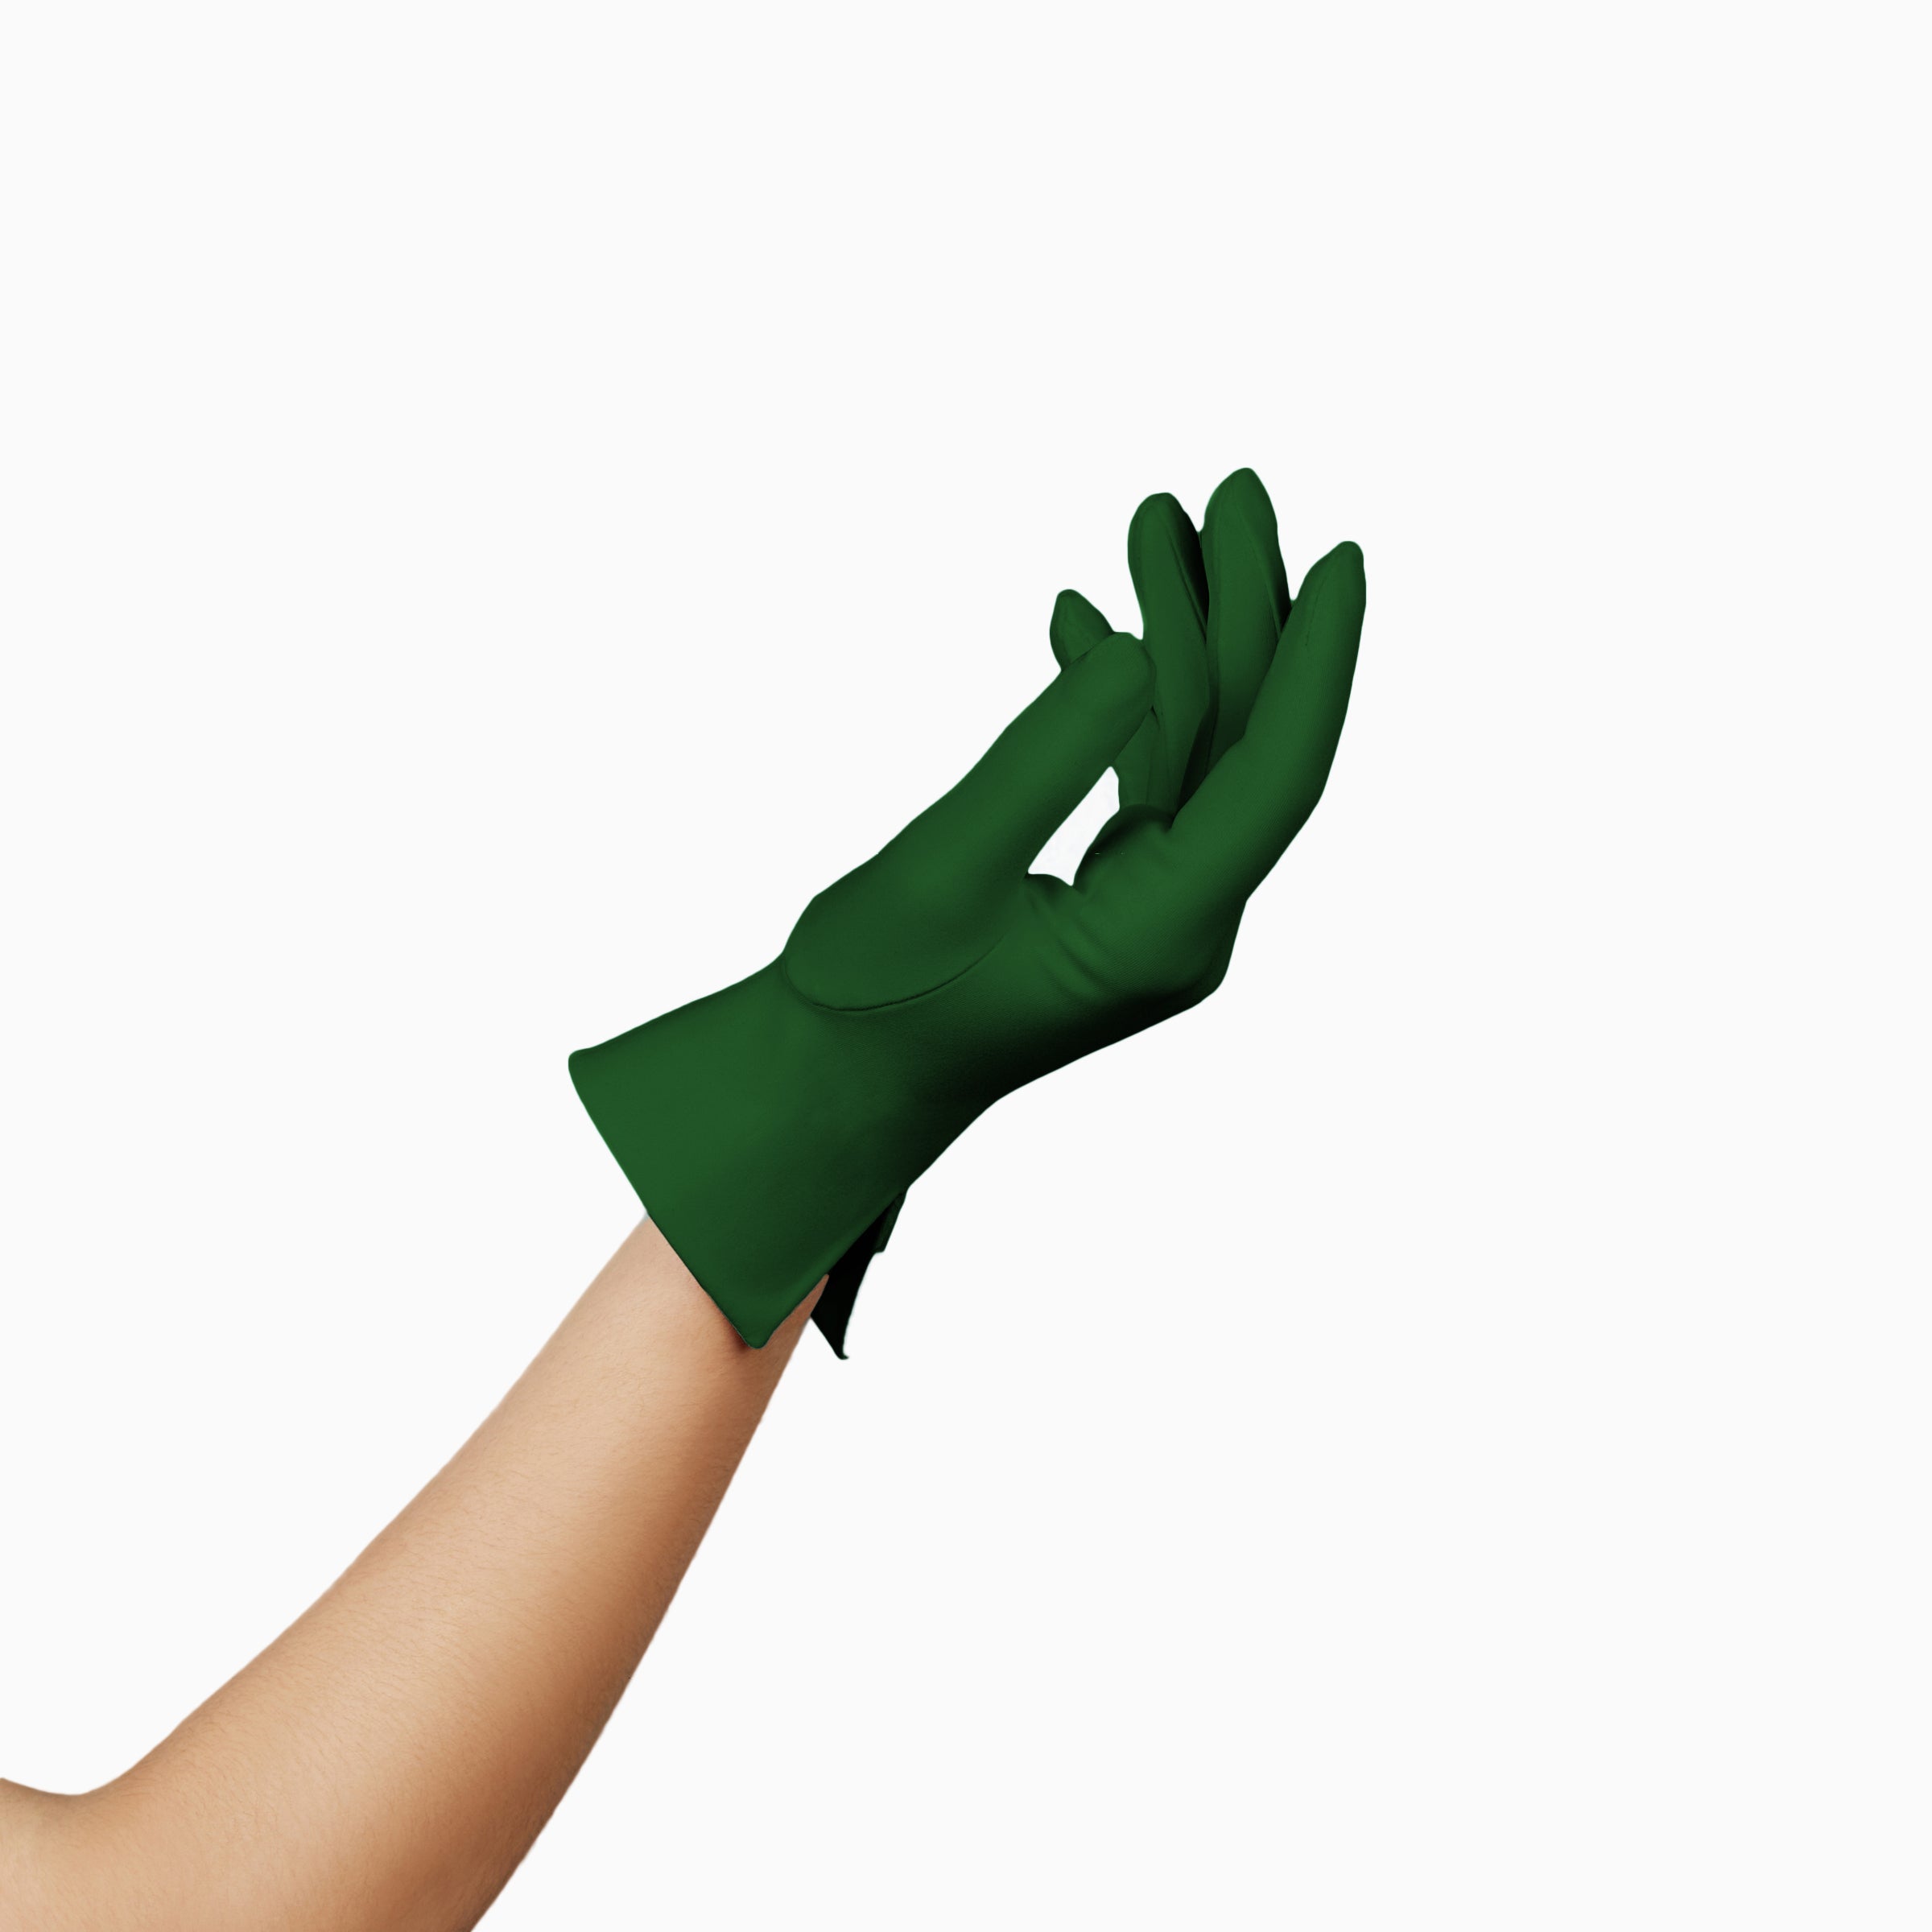 A woman's hand delicately holding THE ISABELLE - Green Day Glove - Holiday Edition by LadyFinch, perfect for spreading holiday cheer. These gloves are designed with touchscreen index fingers, ensuring convenience and functionality.